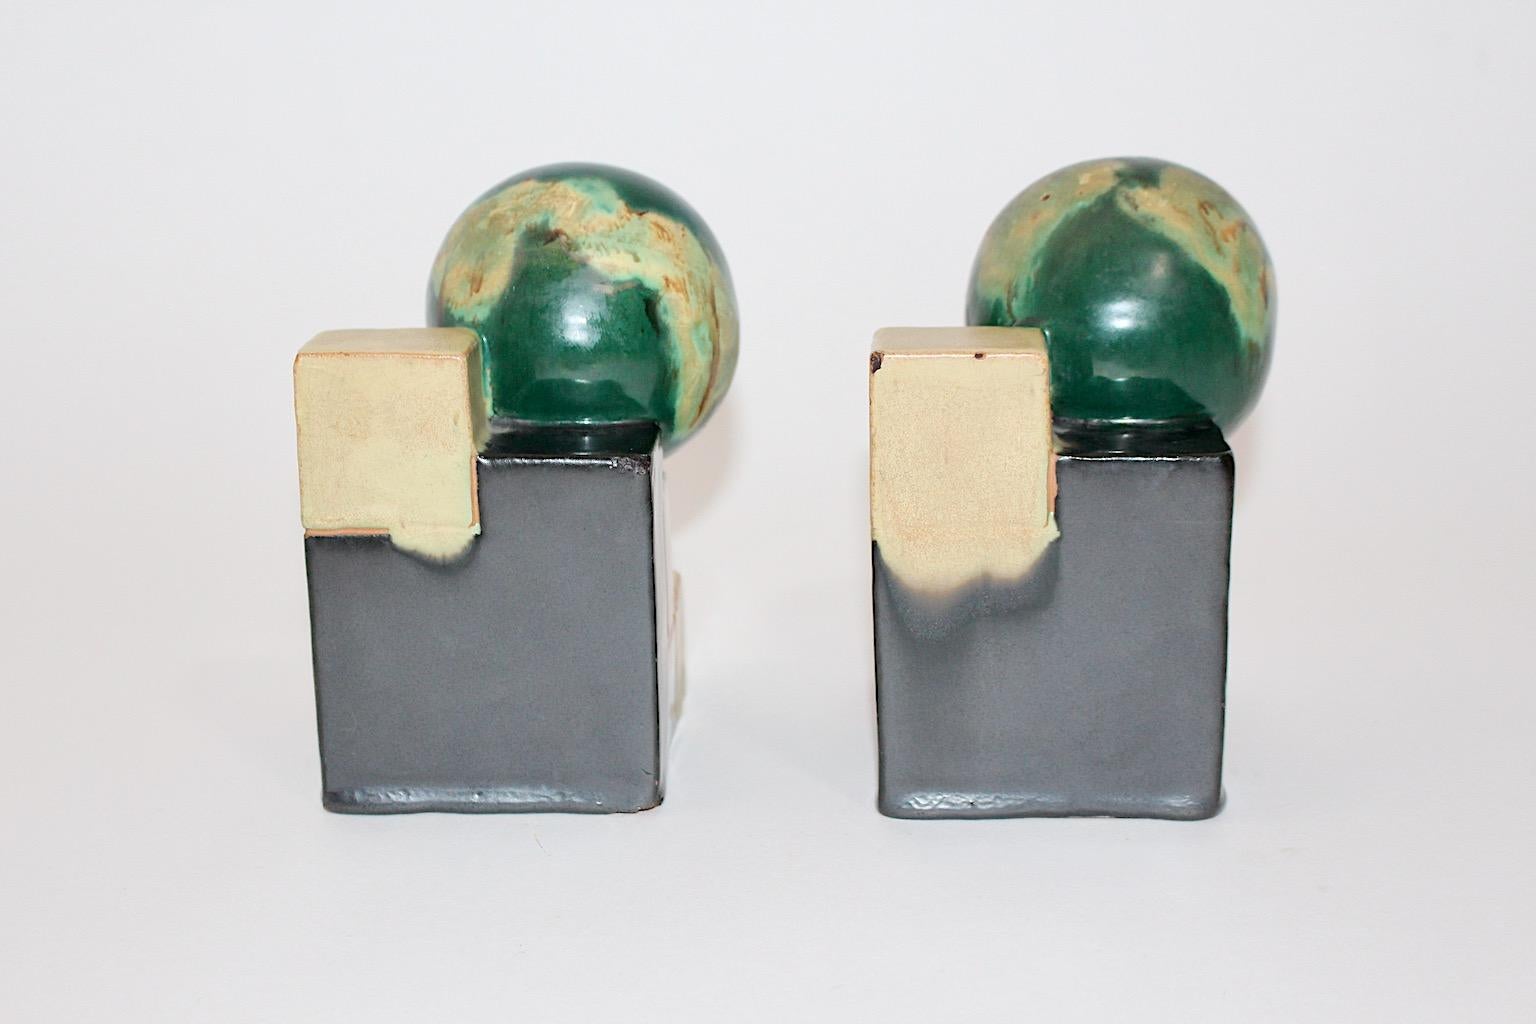 Ceramic Art Deco Attributed Vintage Bookends Green Orange, 1920, Germany For Sale 7